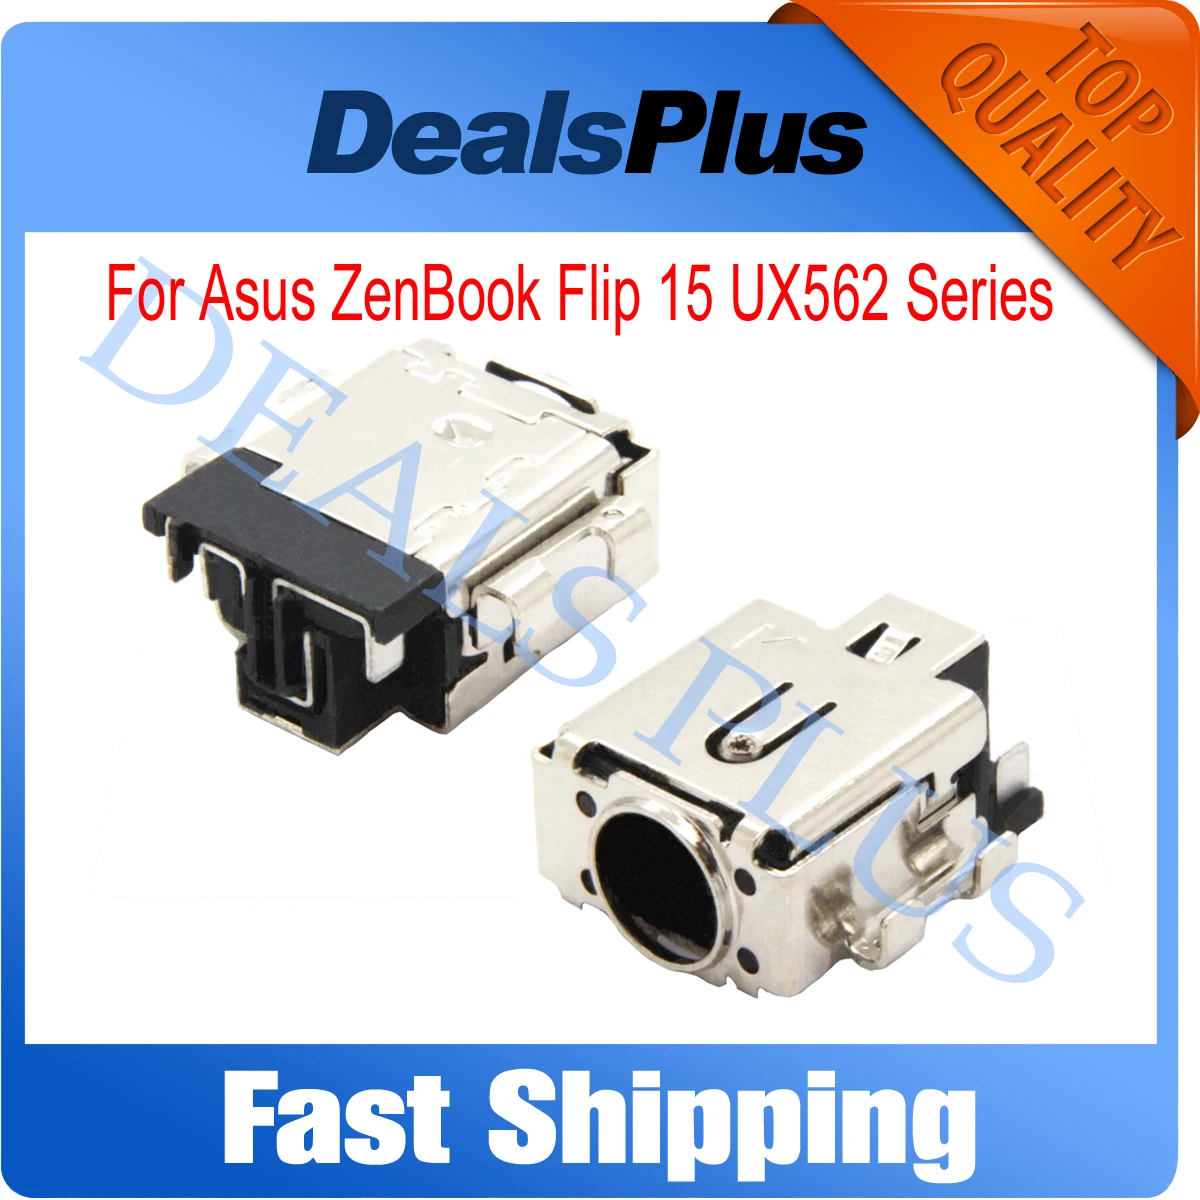 New Replacement DC Power Jack Connector For Asus ZenBook Flip 15 UX562 Series